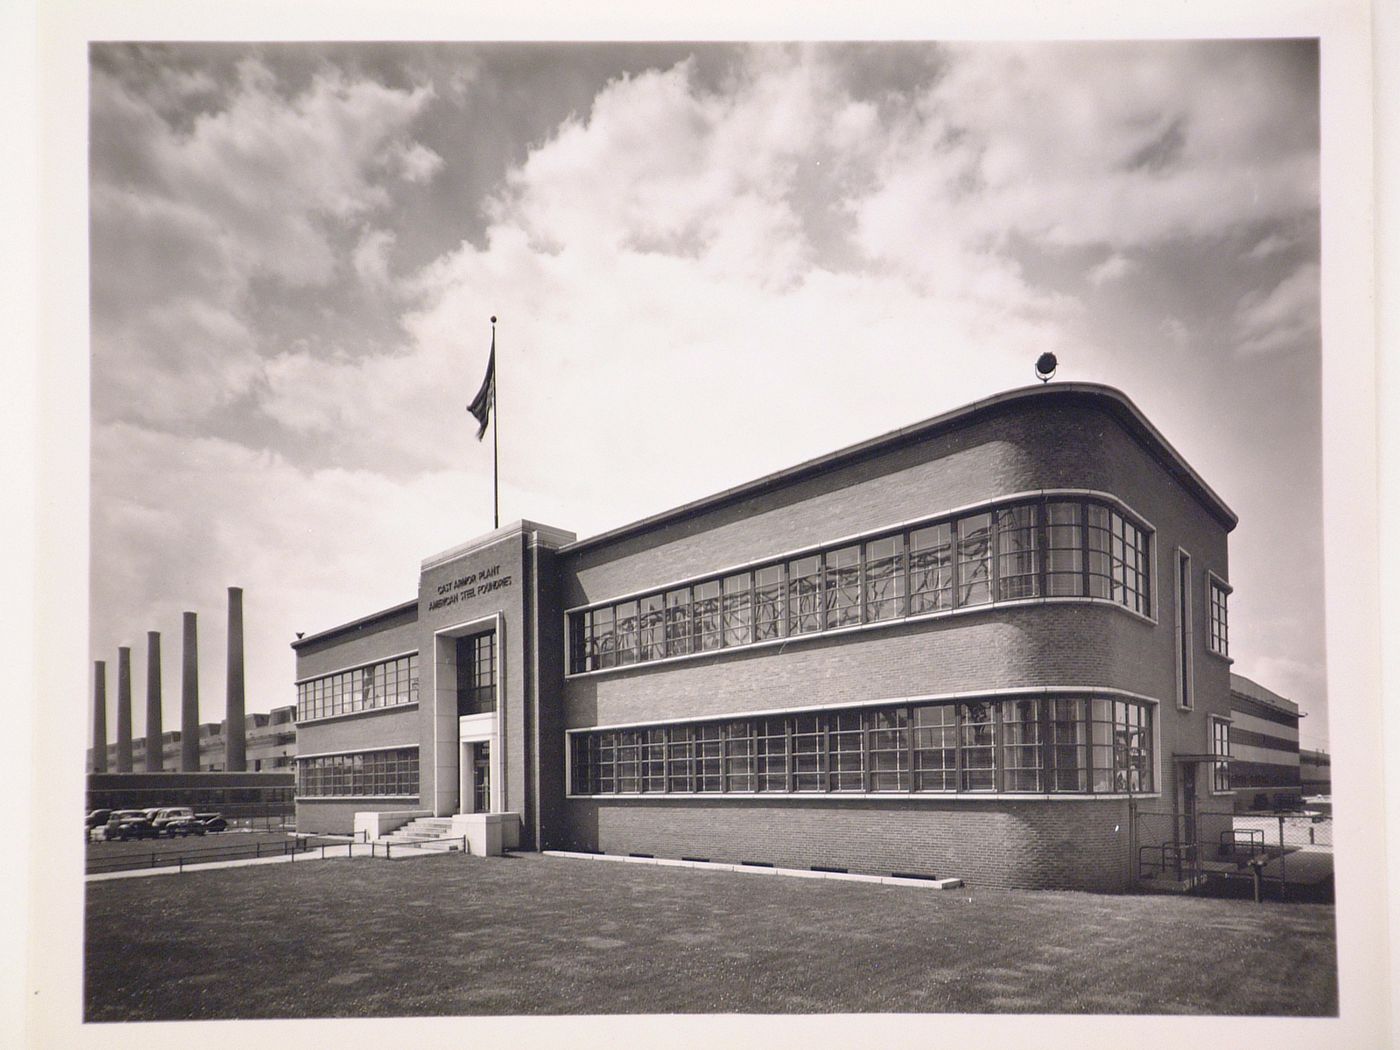 View of the principal and lateral façades of the Administration Building from the northwest [?], American Steel Foundries Cast Armor Plant, East Chicago, Indiana